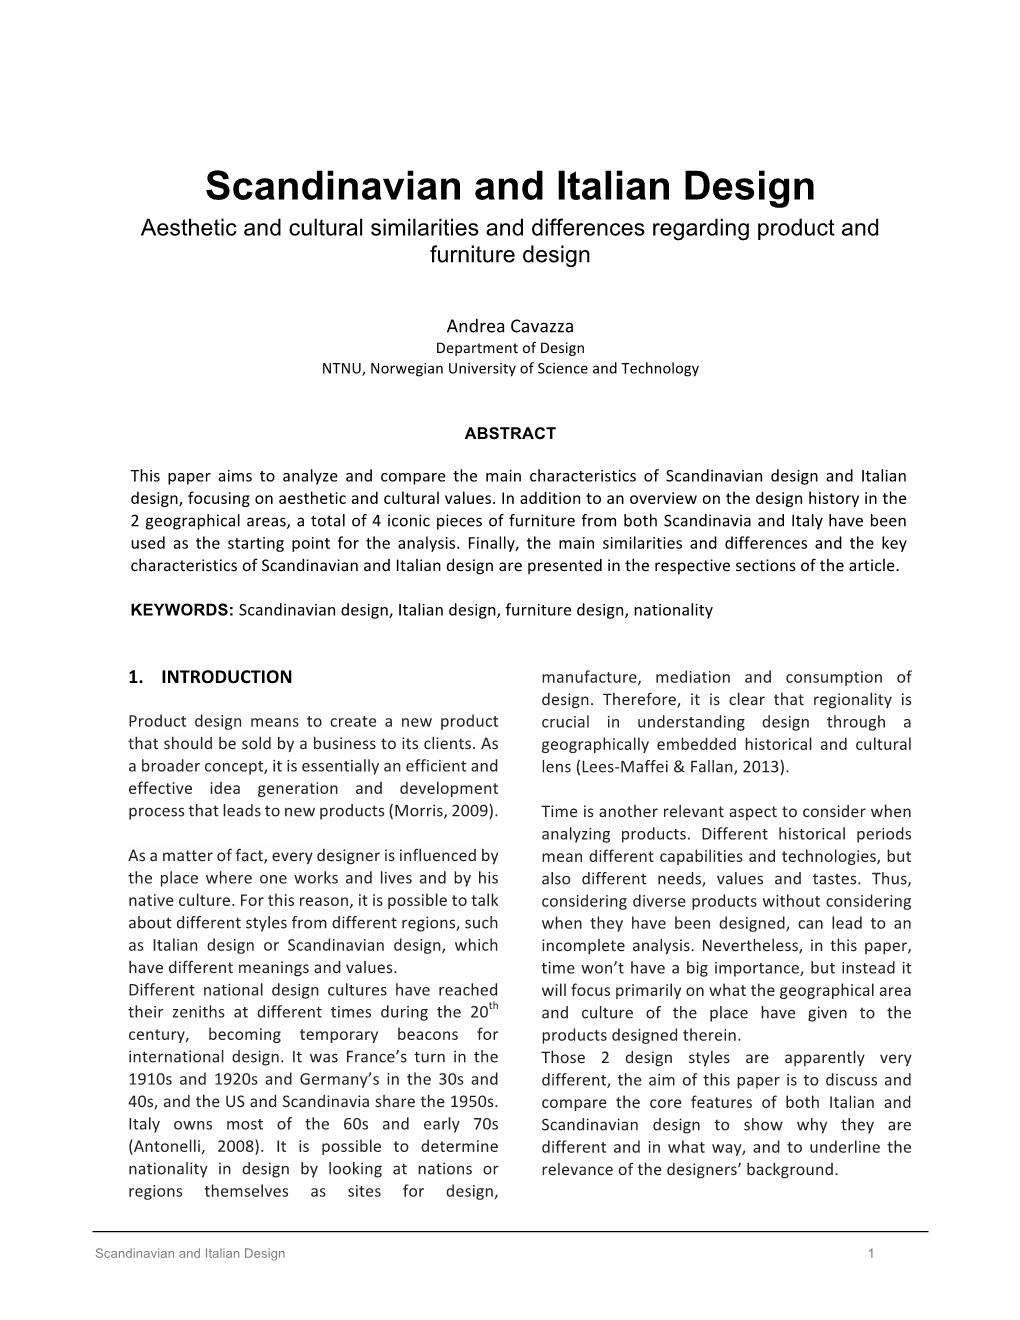 Scandinavian and Italian Design Aesthetic and Cultural Similarities and Differences Regarding Product and Furniture Design